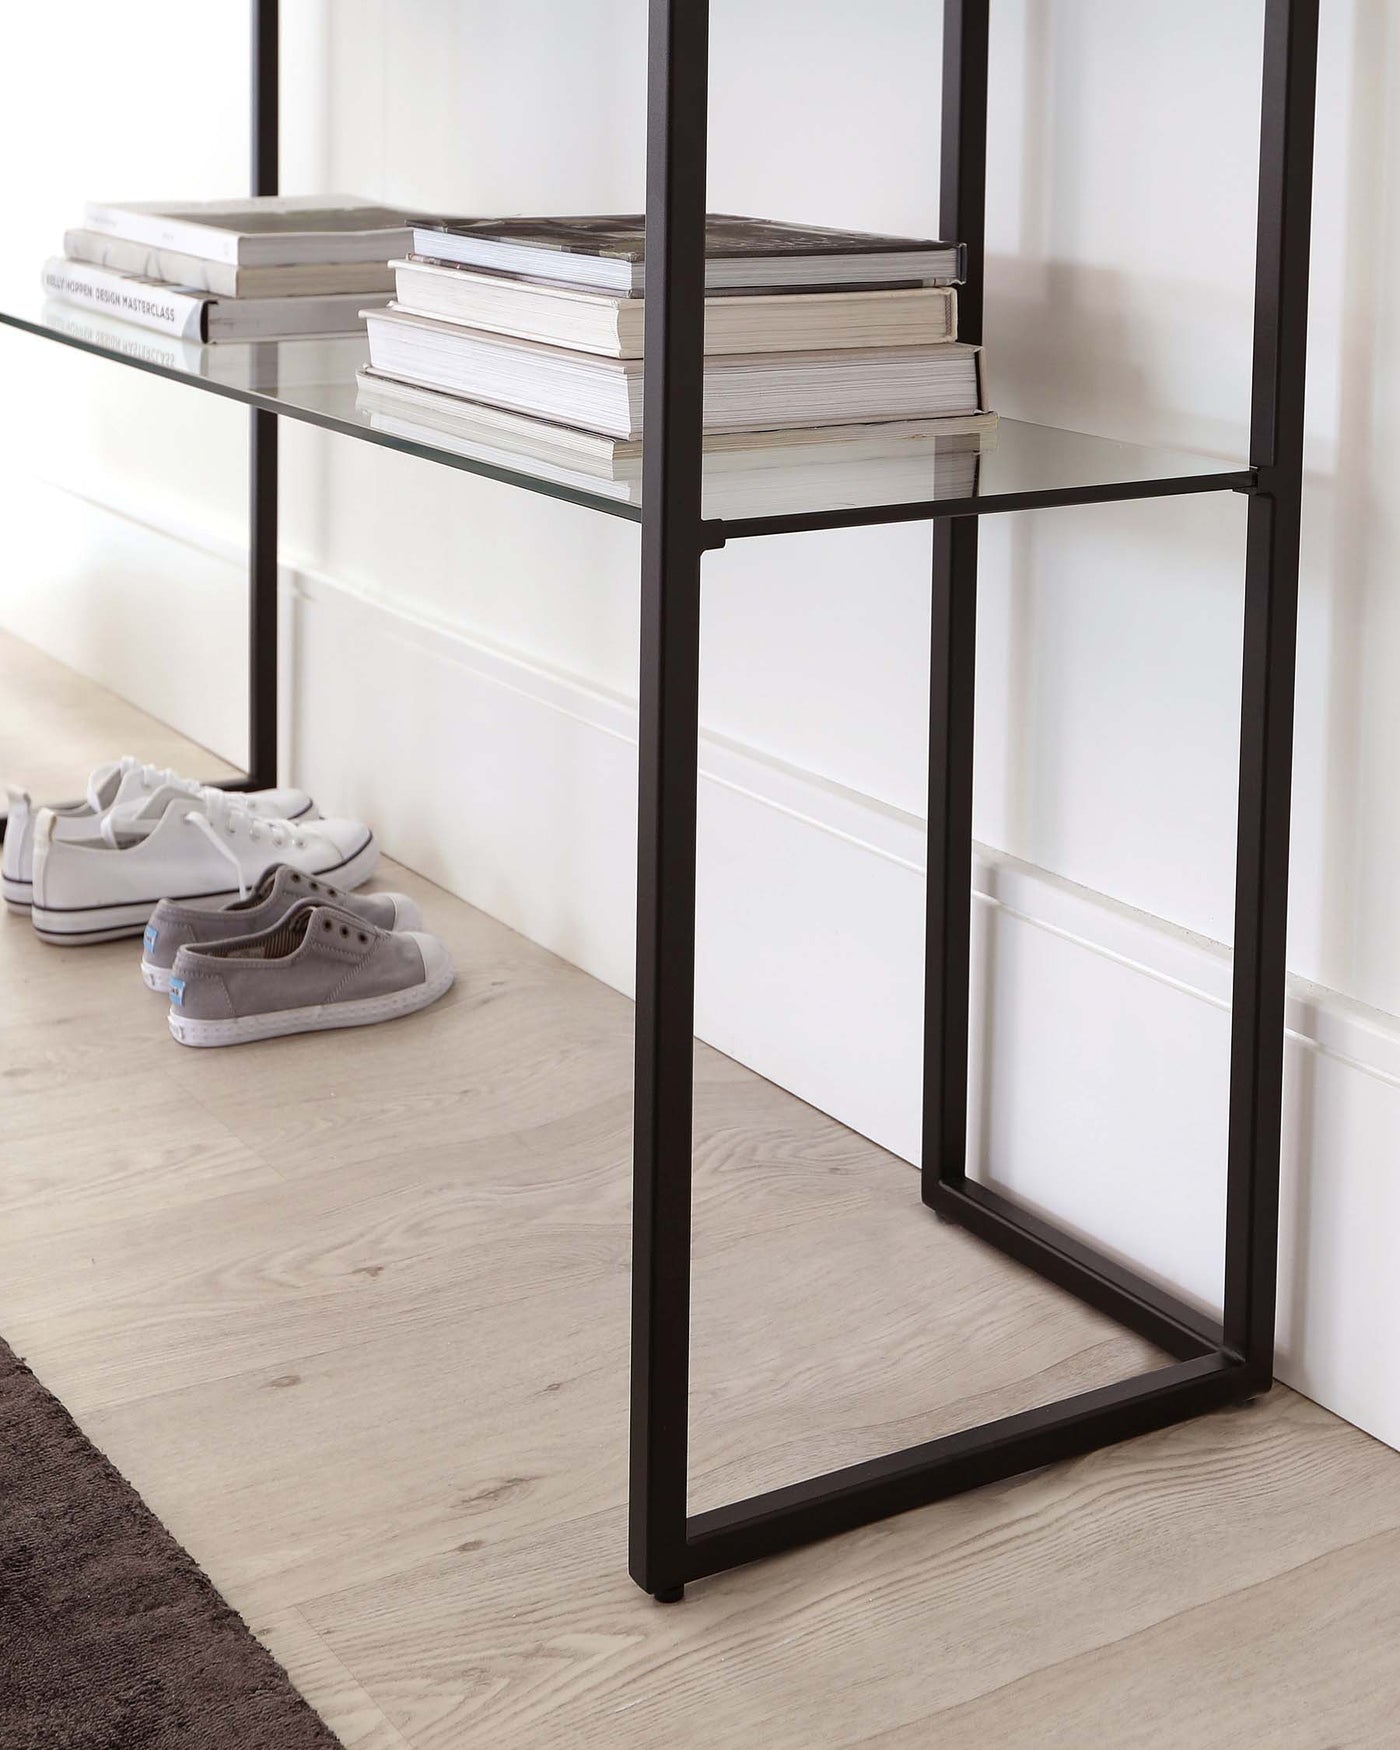 A minimalist black metal frame shelving unit with three levels, featuring clear glass shelves filled with neatly stacked books. The unit is positioned against a light-coloured wall above a light wooden floor, with a pair of sneakers casually placed to one side.